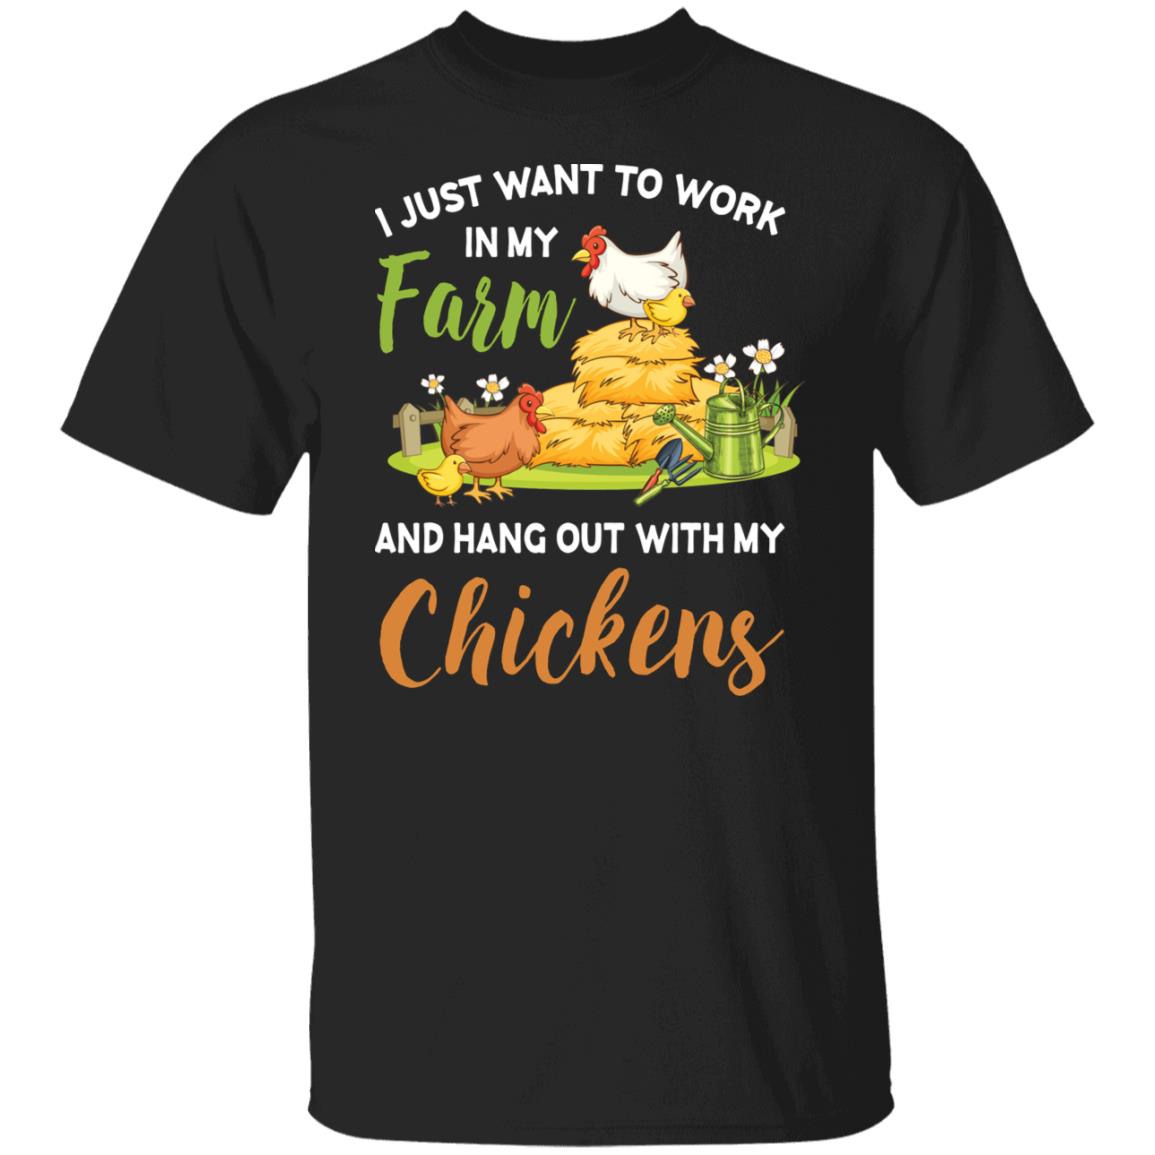 I Just Want To Work In My Farm Tee